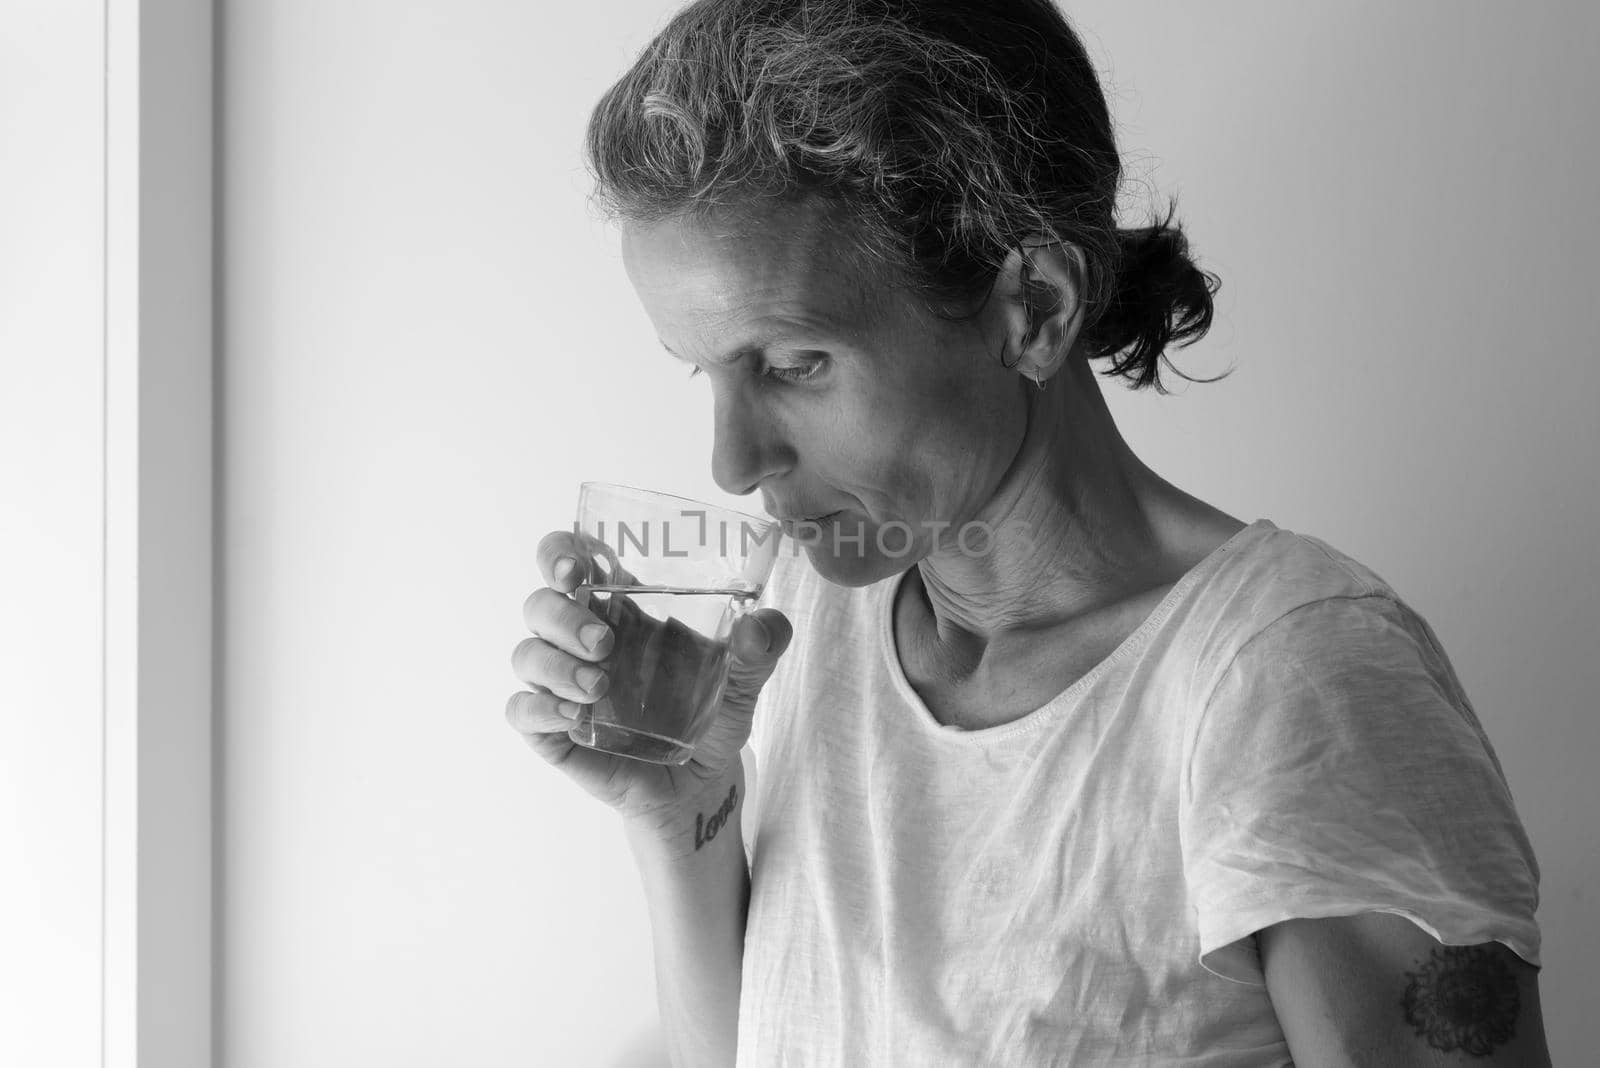 Profile of middle aged woman holding glass and looking pensive - addition concept (black and white) by natalie_board